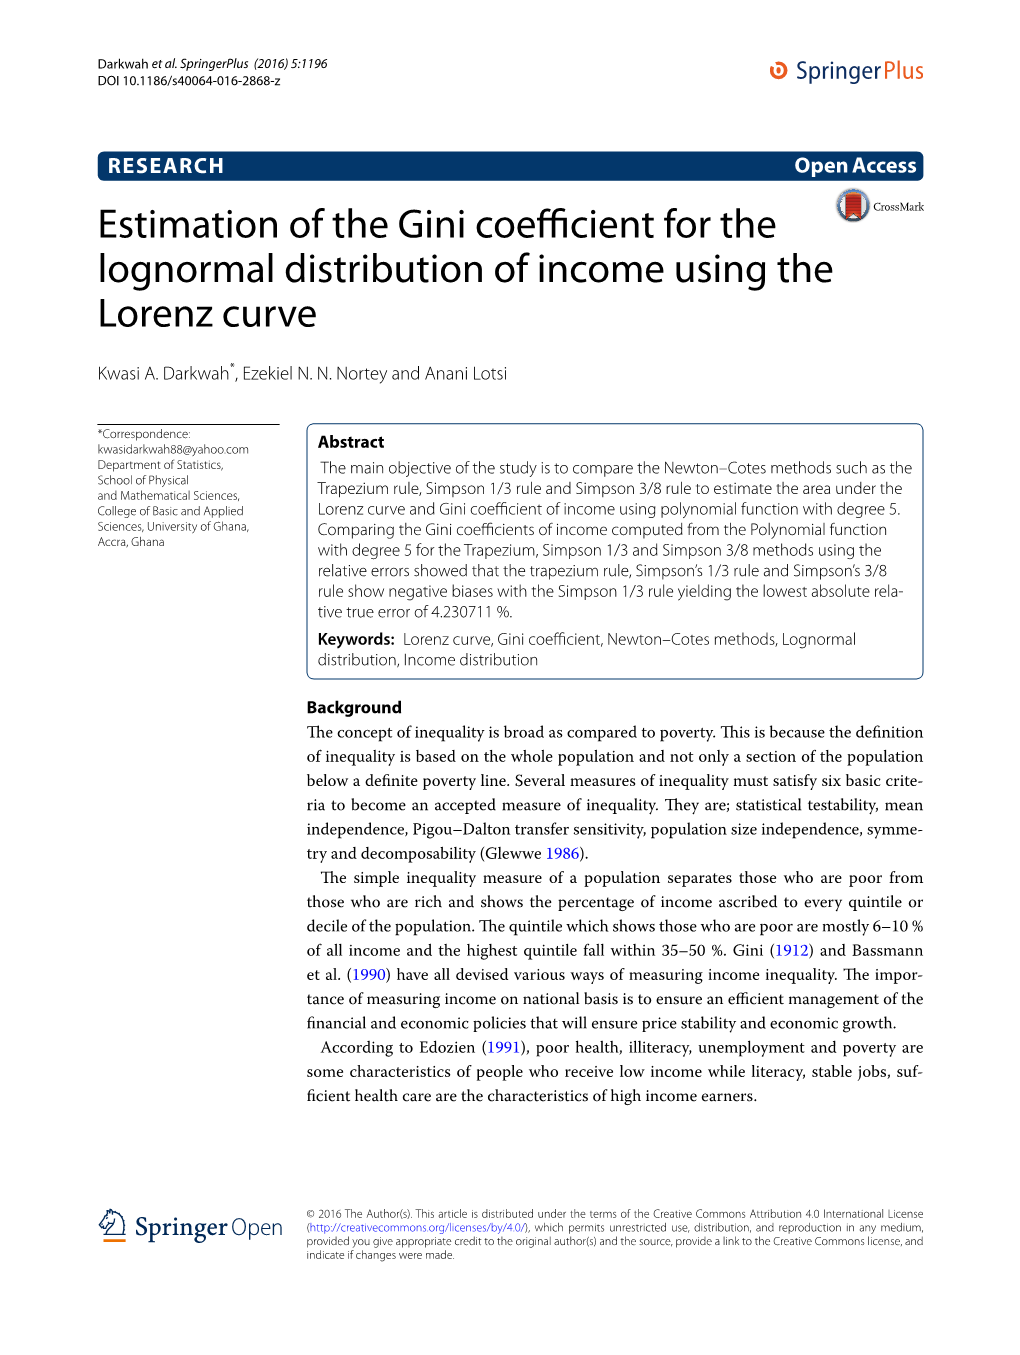 Estimation of the Gini Coefficient for the Lognormal Distribution of Income Using the Lorenz Curve